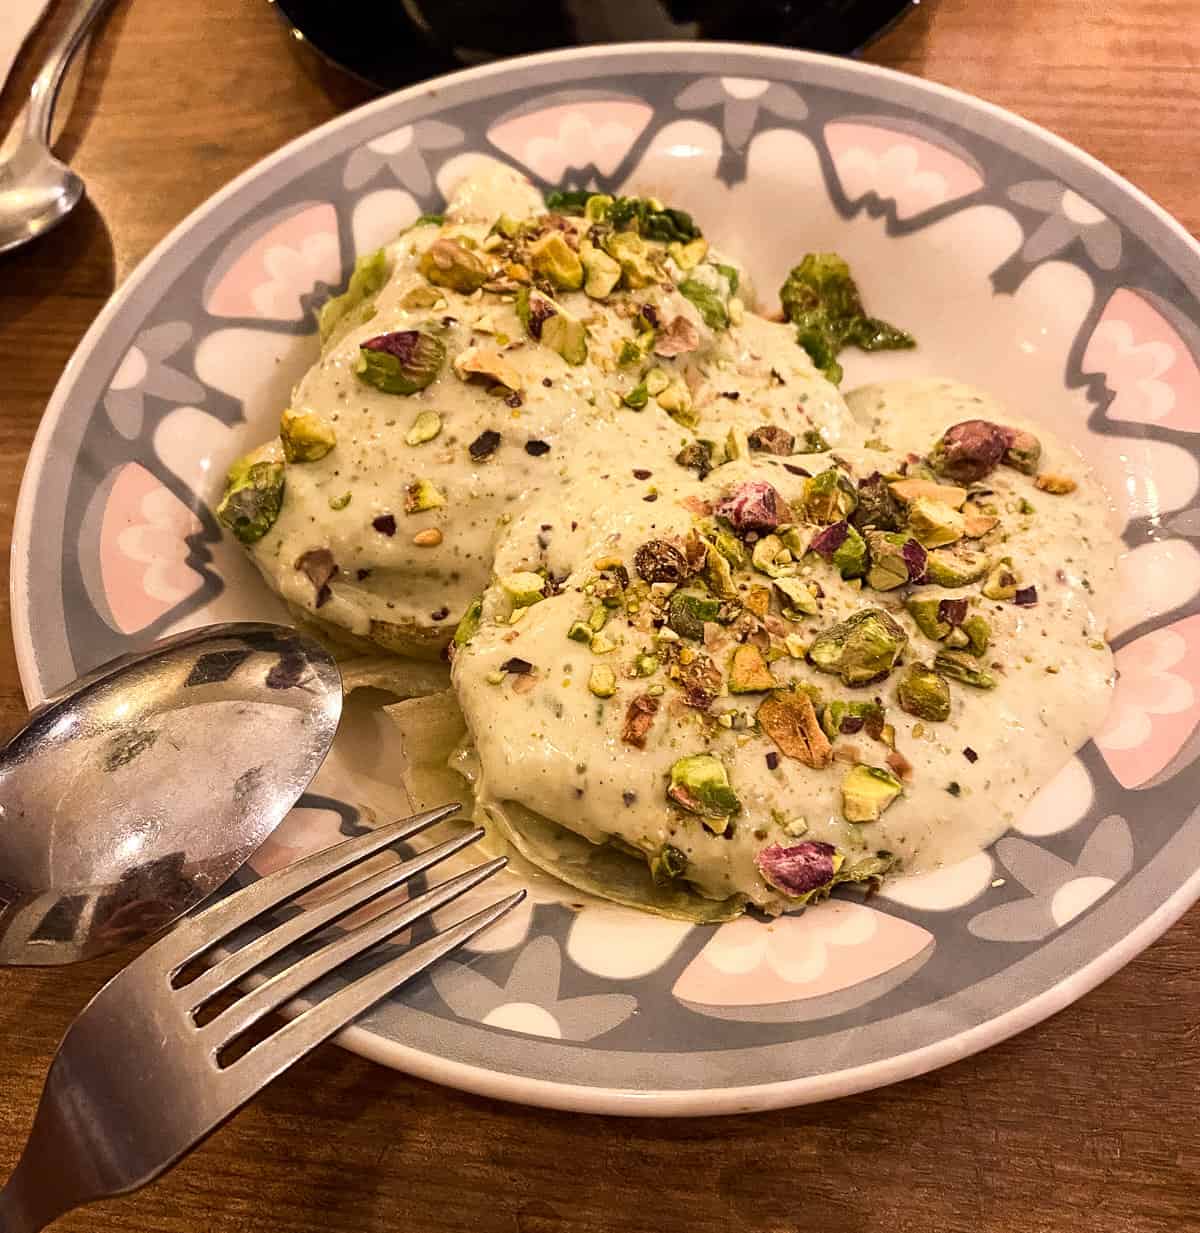 grilled lettuce with Pistachio dressing at Gatogato in Madrid